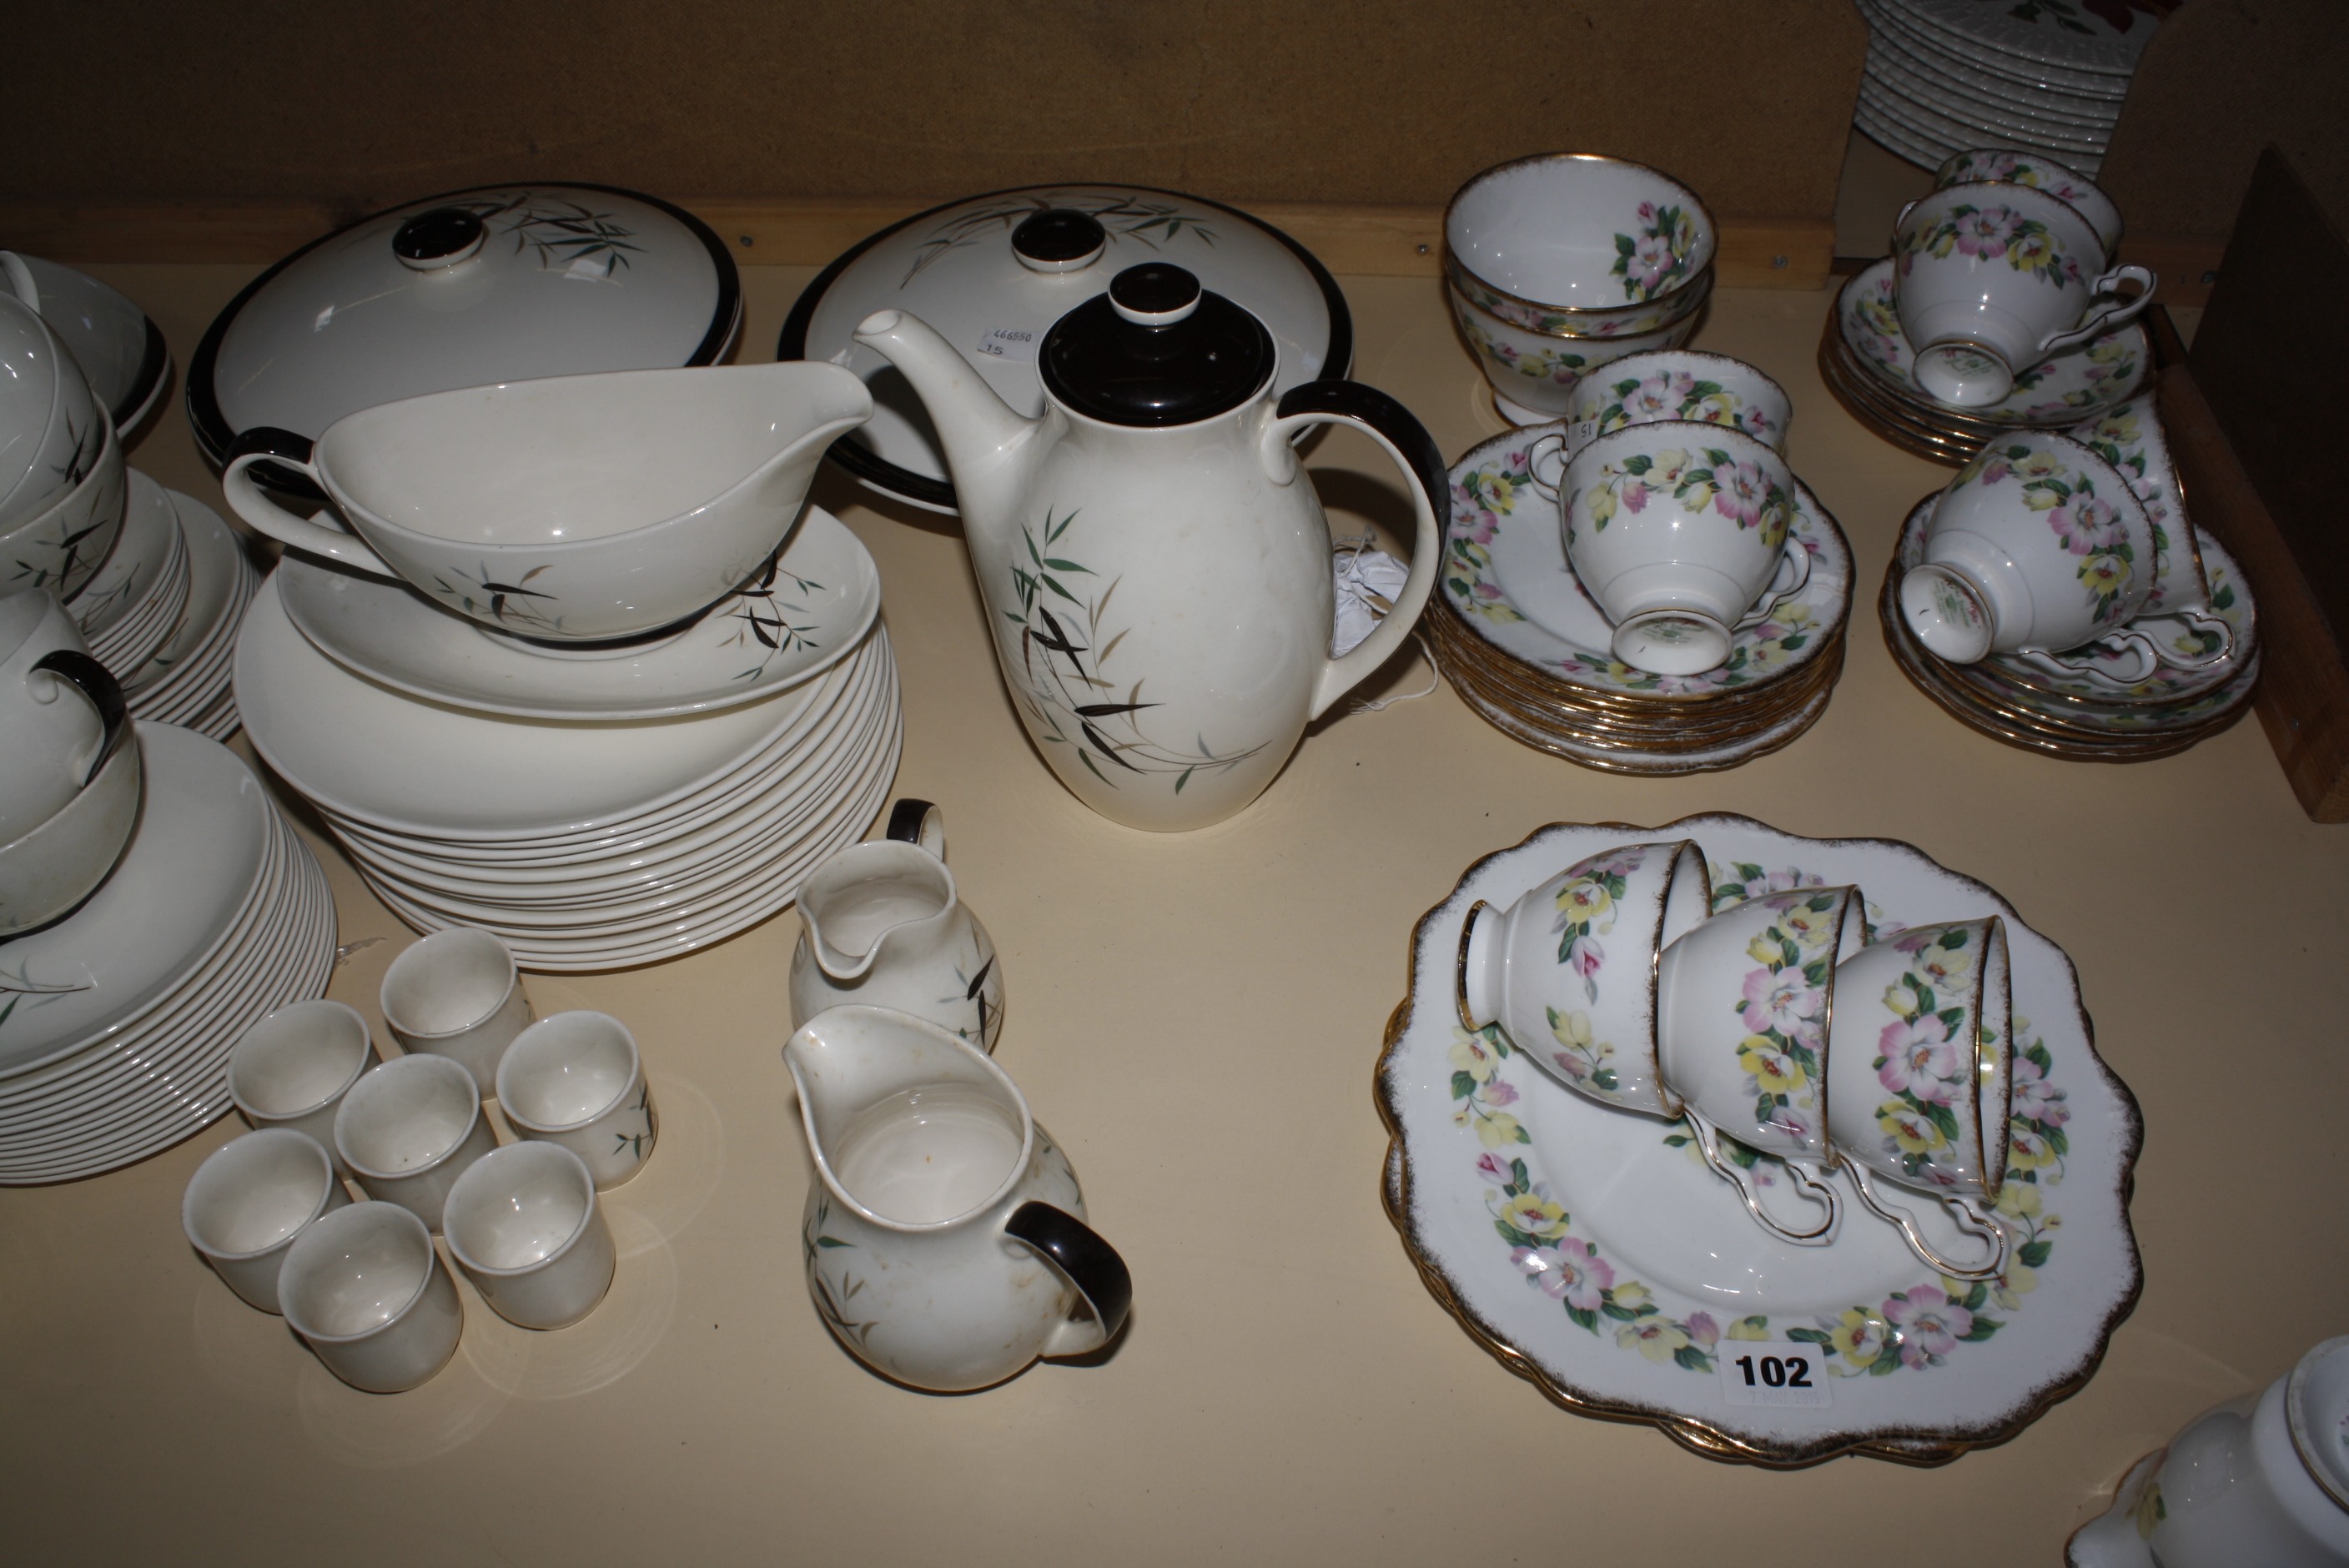 Royal Doulton 'Bamboo' part dinner and tea service and a Royal Stafford 'Syringa' part tea service